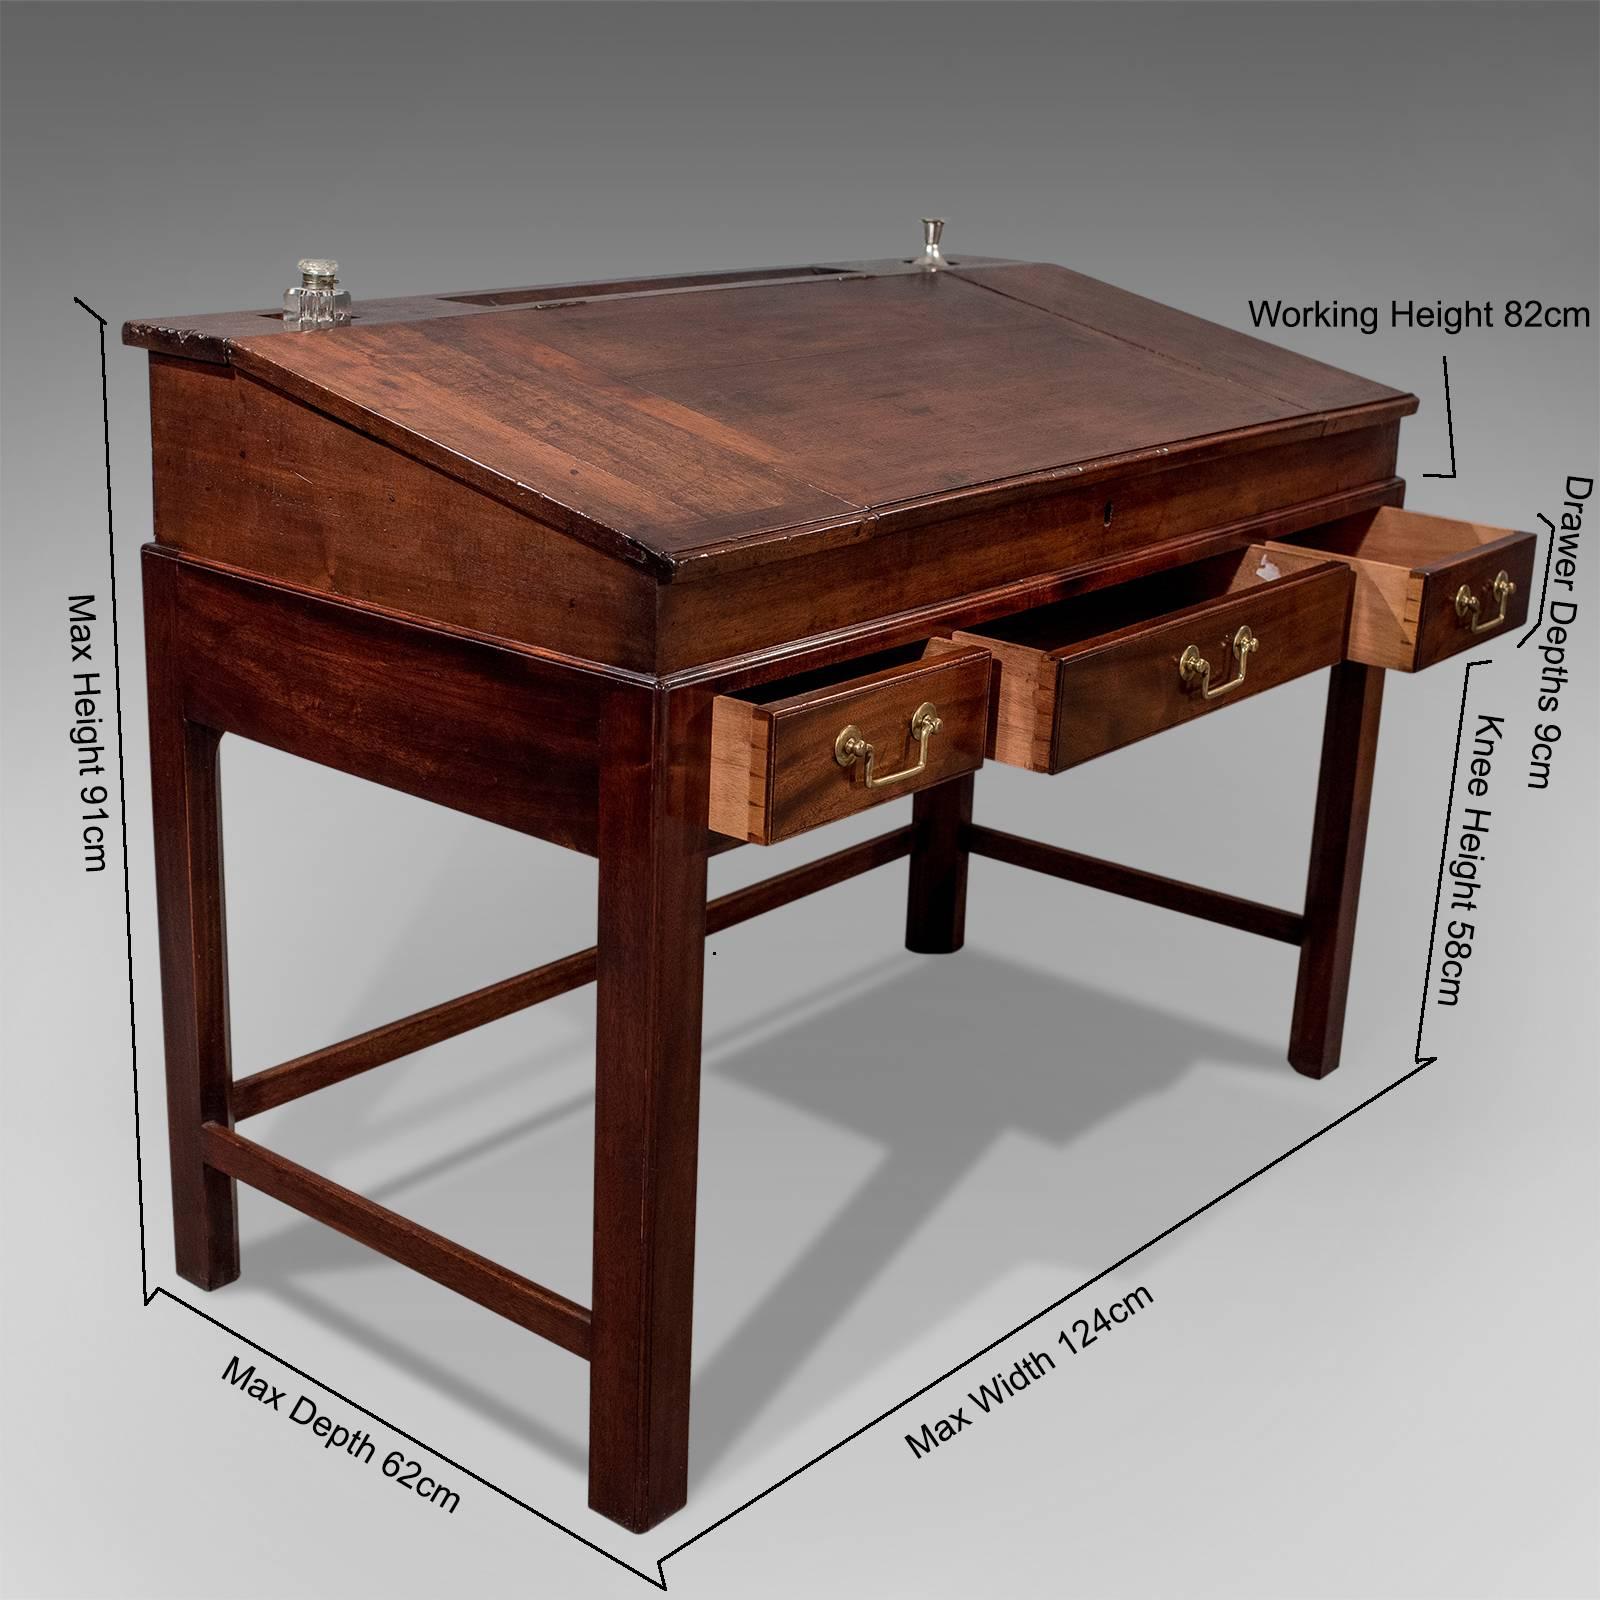 This is an antique school master's desk, an English, Georgian, mahogany desk dating to the early 19th century, circa 1800.

Presented in good antique condition
Of quality craftsmanship with attractive proportions
Attractive mahogany showing